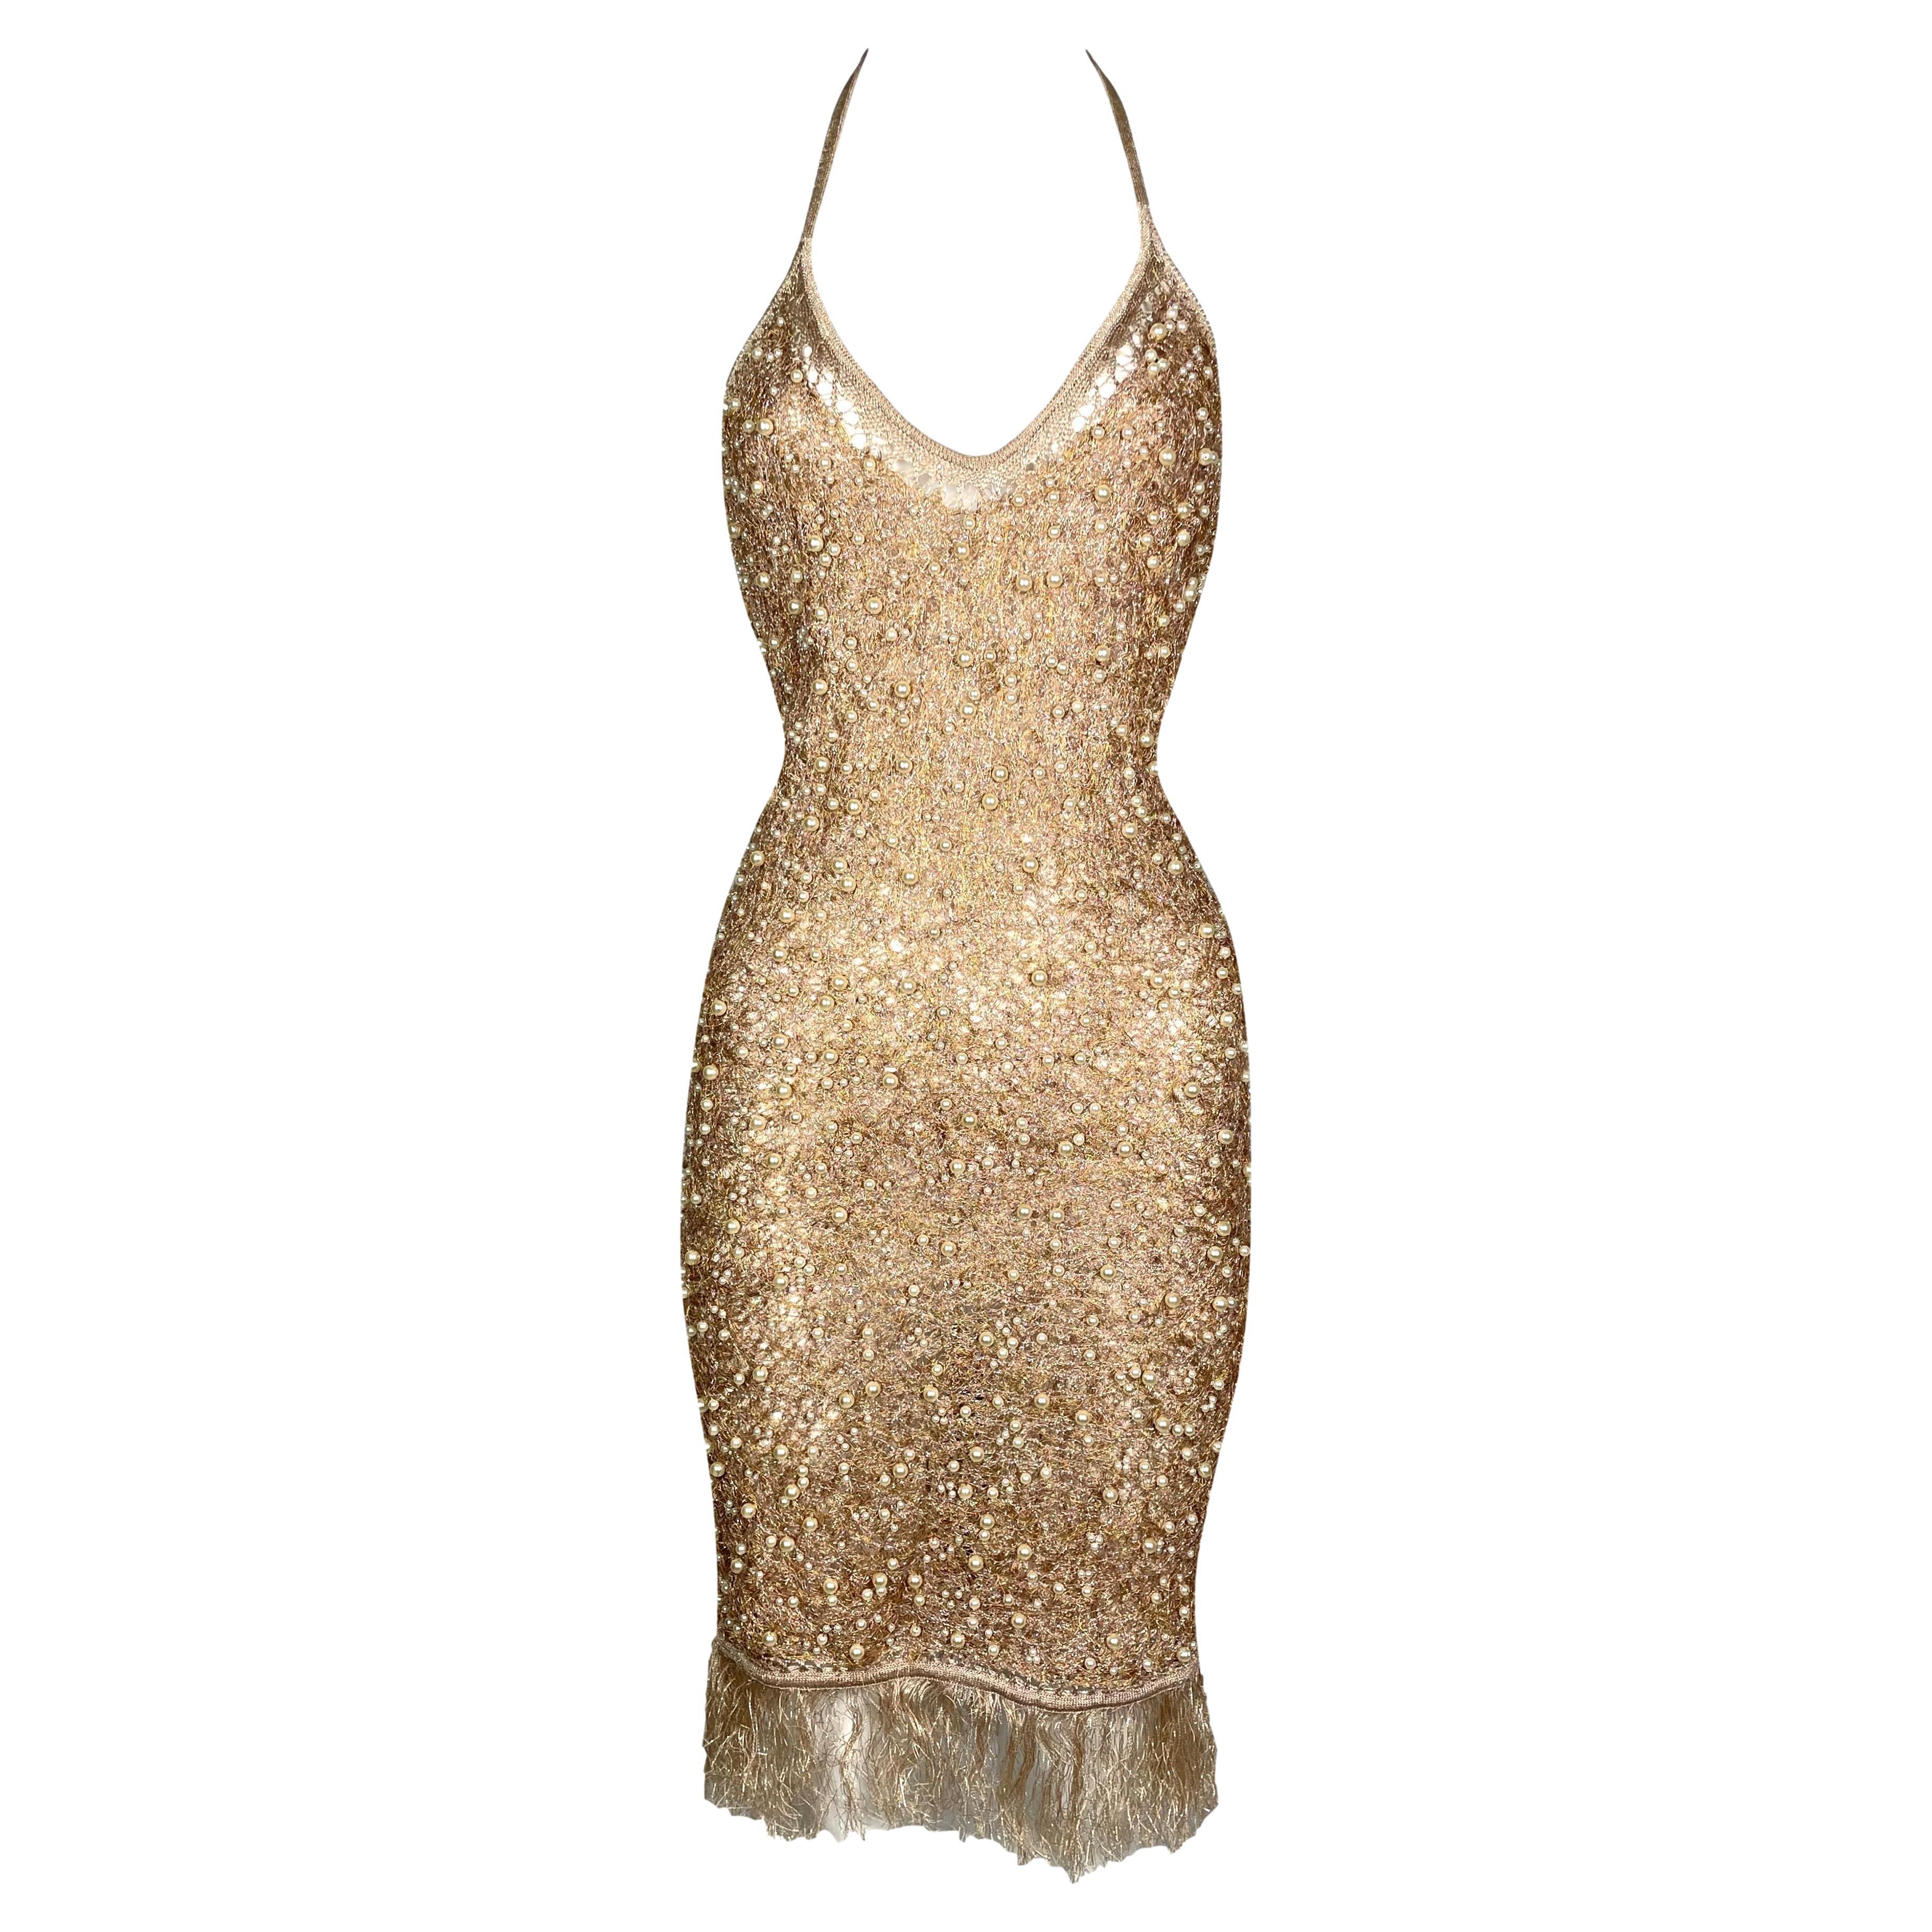 S/S 2007 John Galliano Sheer Pearl Embellished Nude & Gold Bodycon Halter Dress